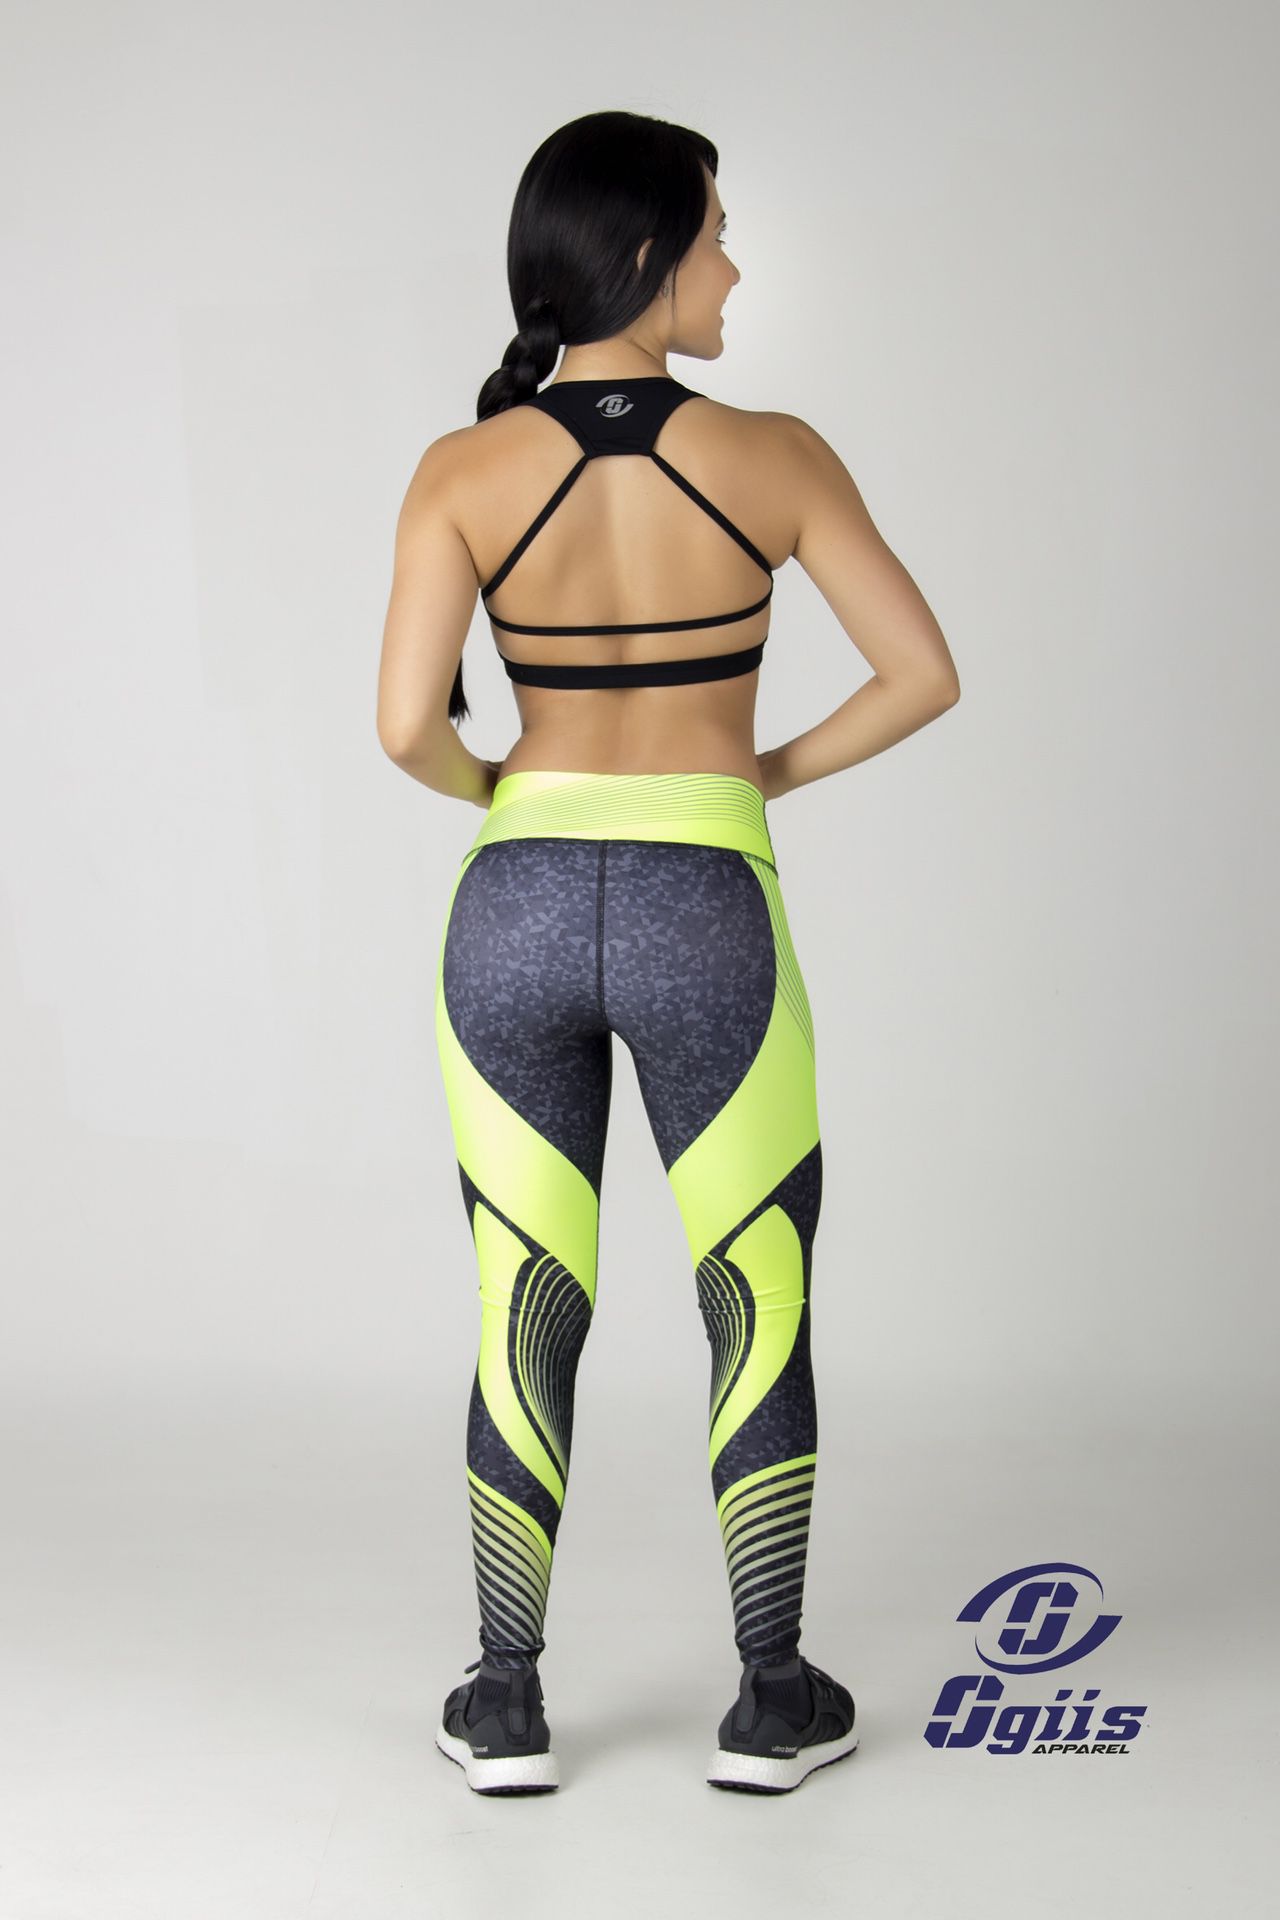 Wholesale Quality Colombian Leggings for Sale in Coral Gables, FL - OfferUp